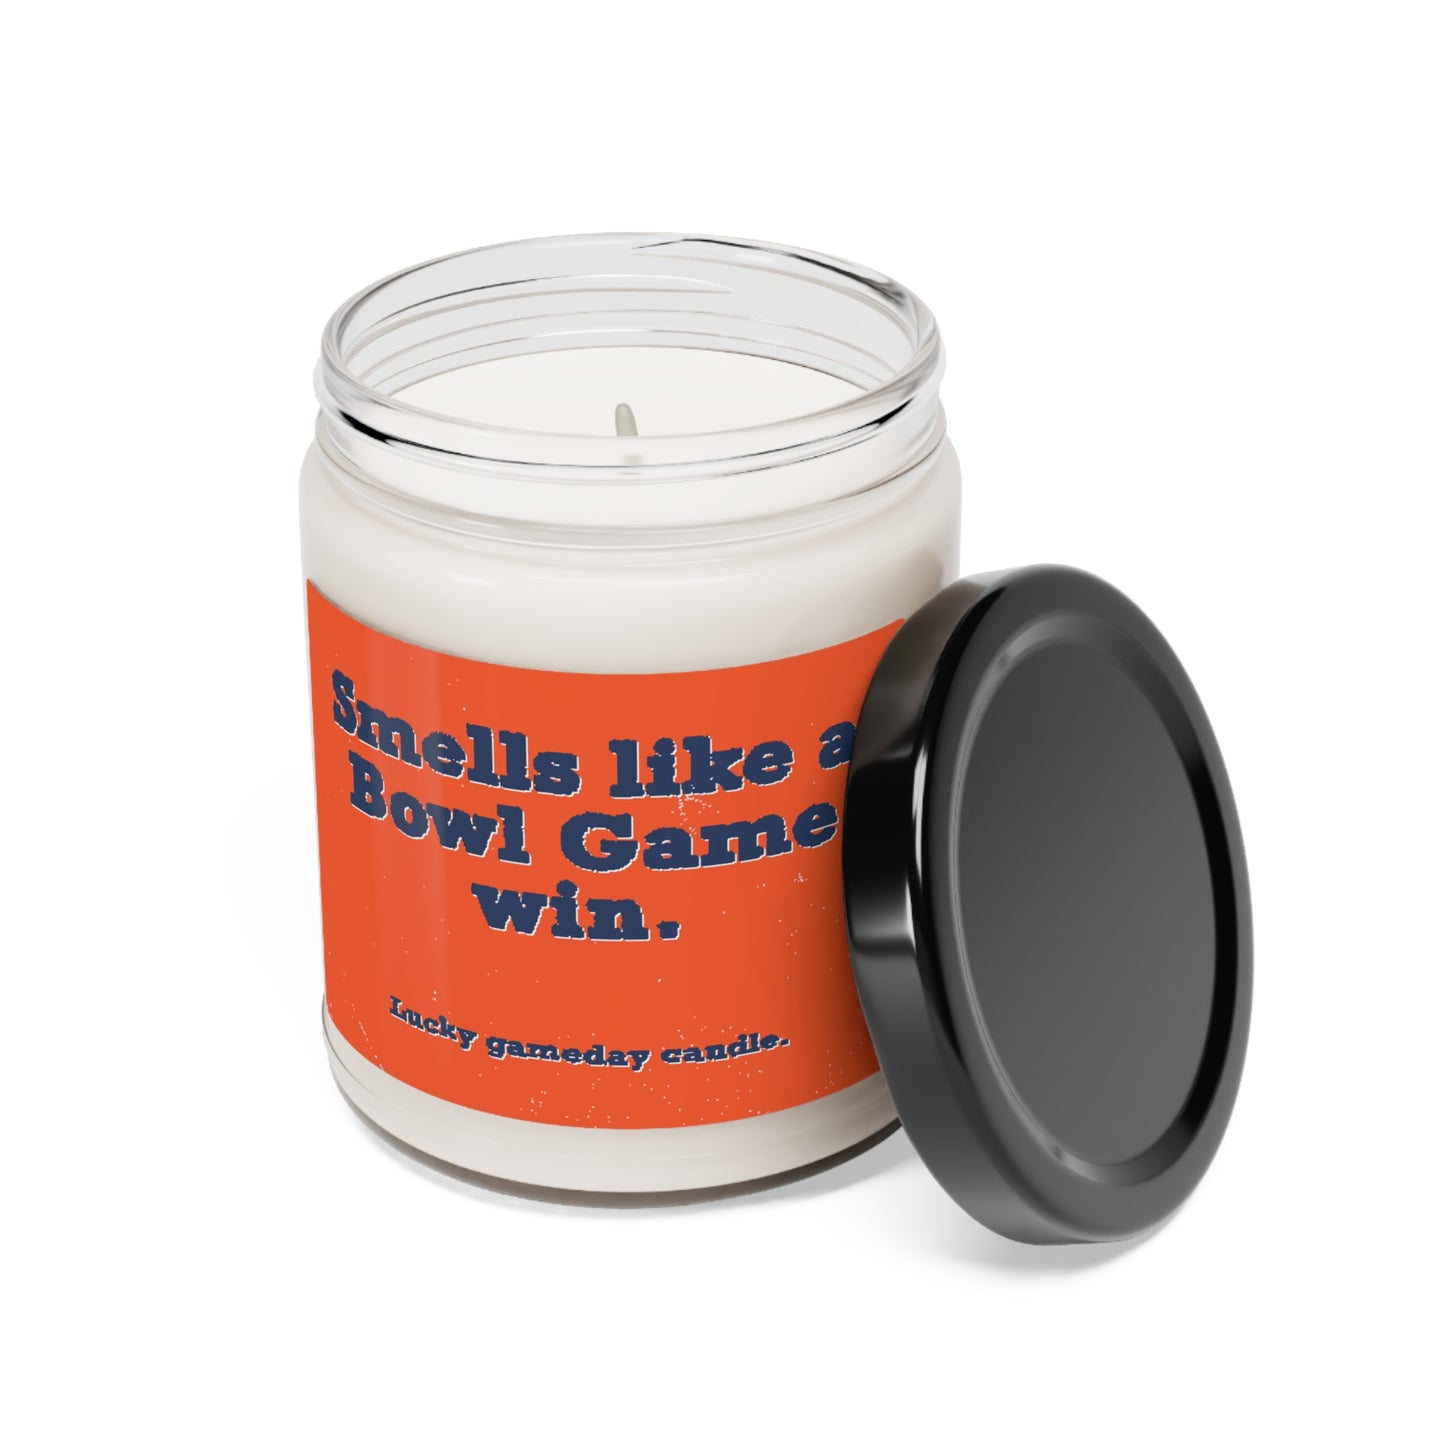 Virginia - "Smells Like a Bowl Game Win" Scented Candle